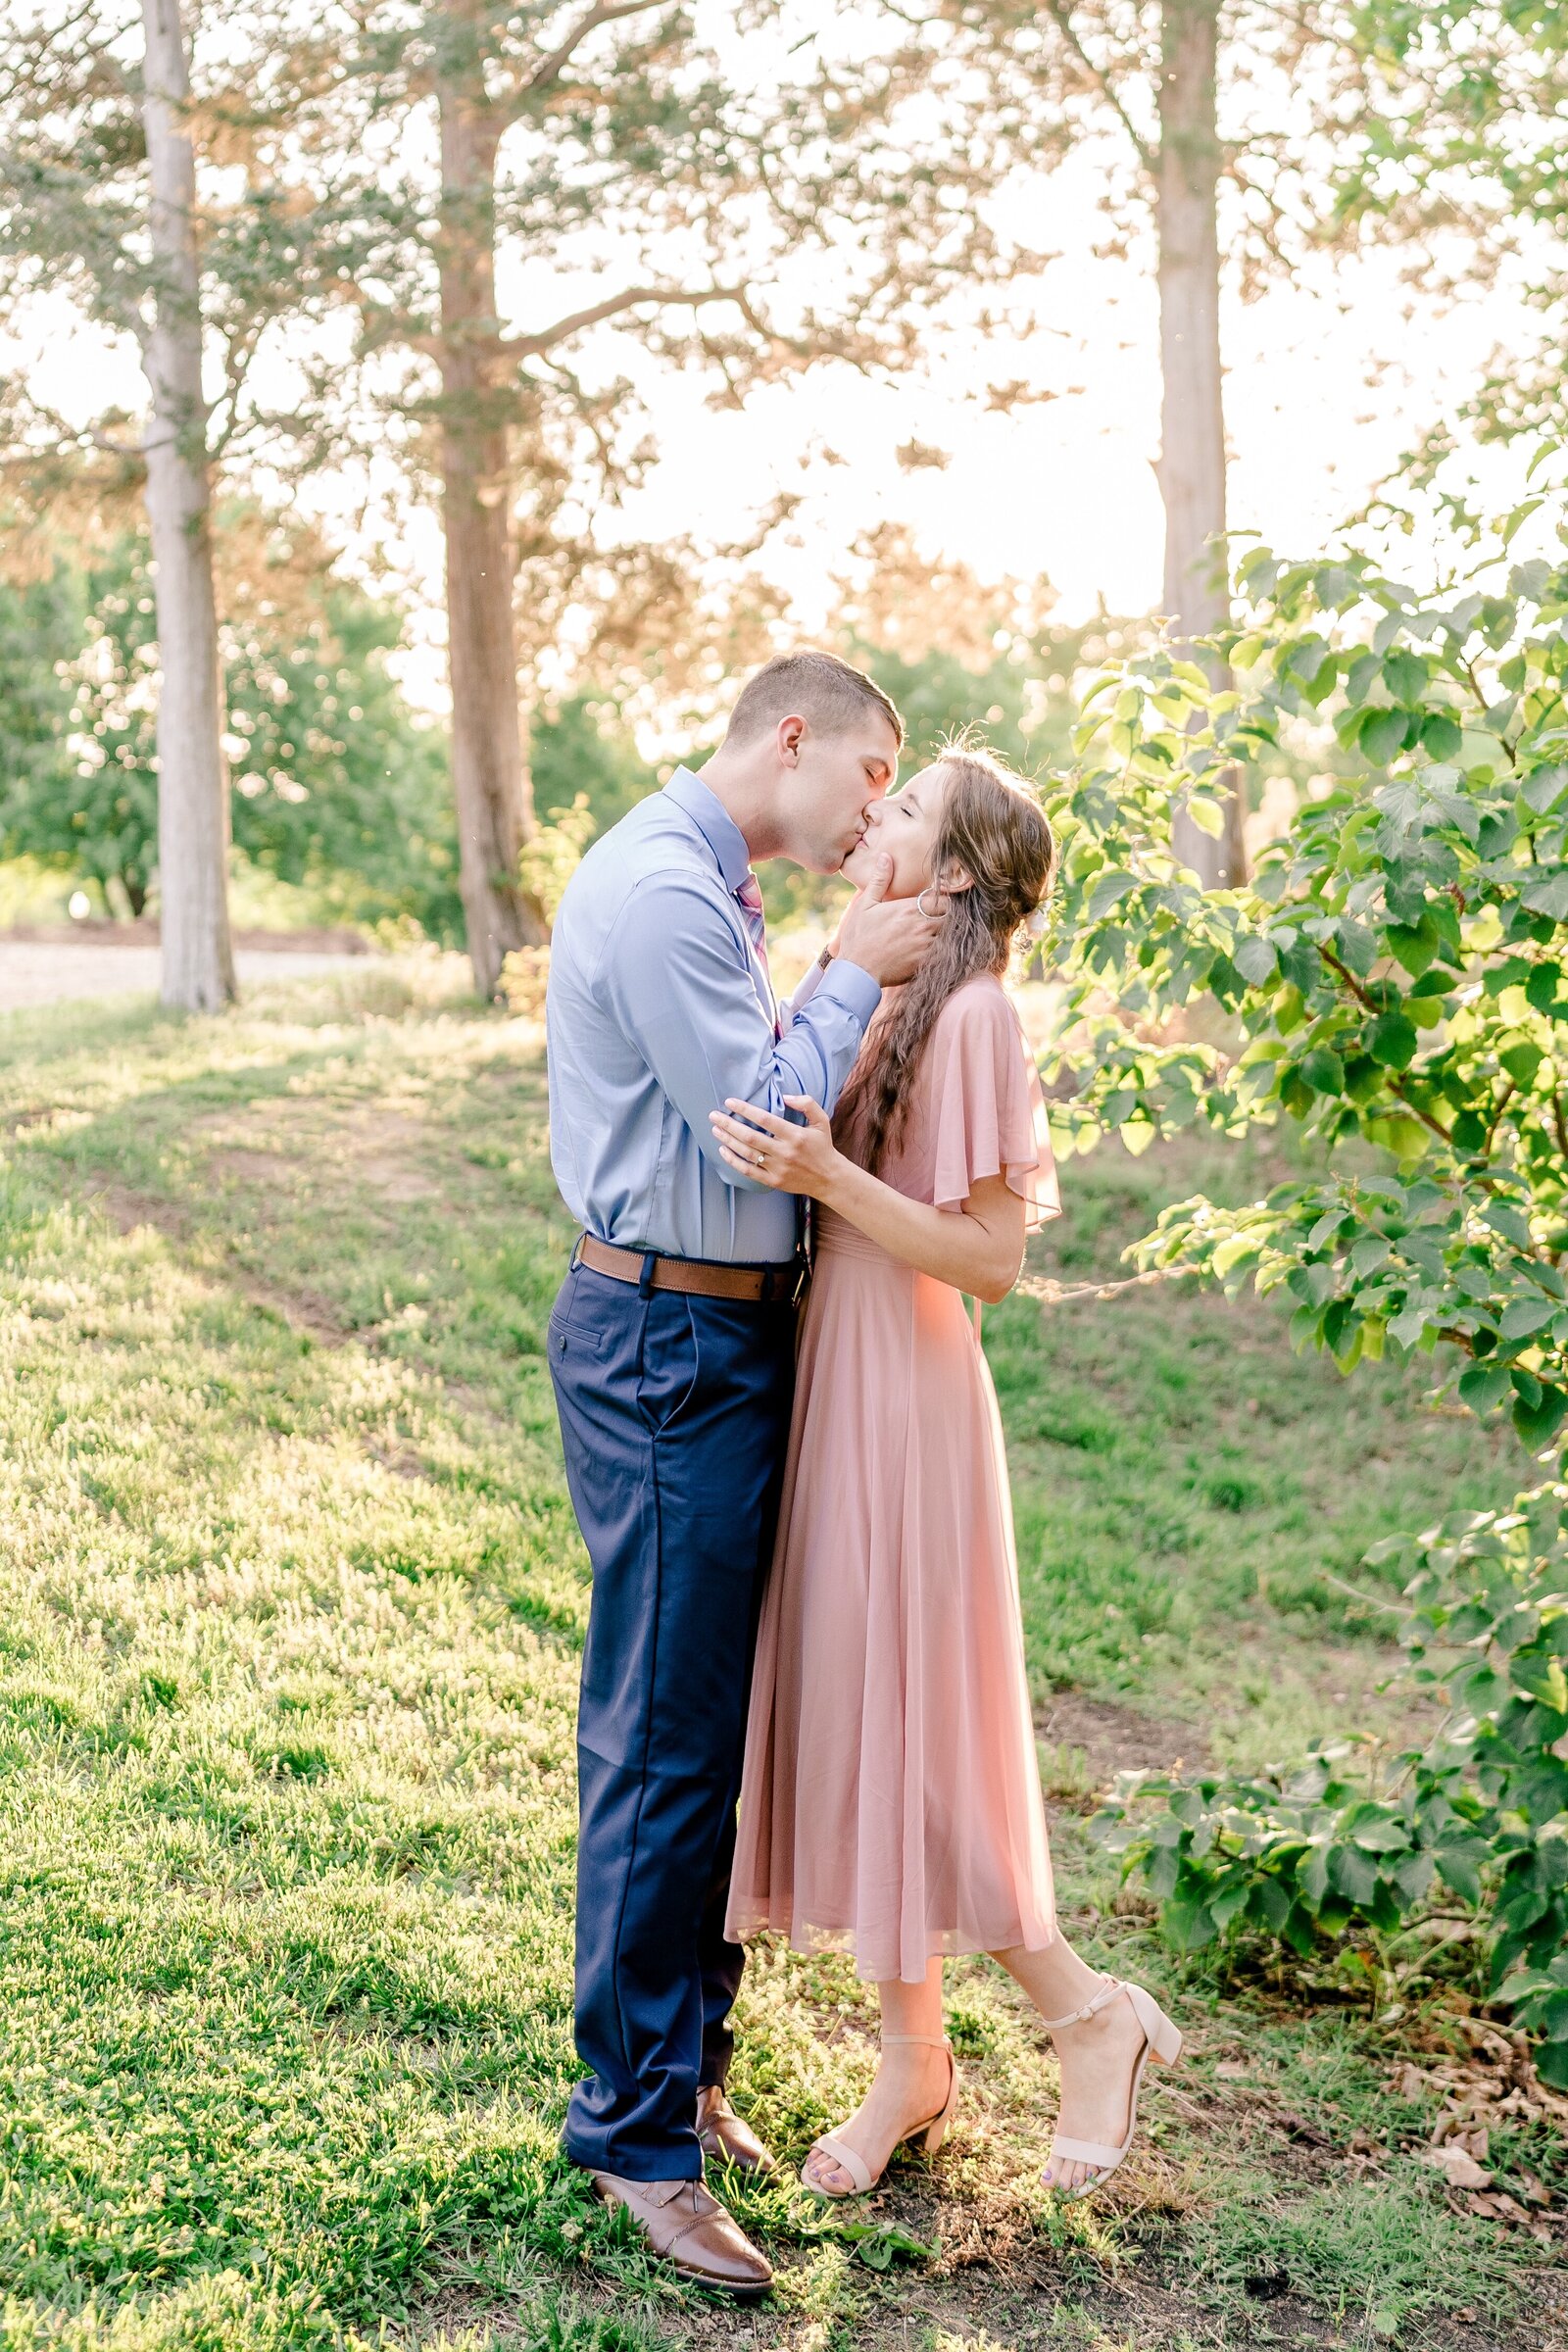 A couple shares a kiss in golden hour light during their engagement session at Green Spring Gardens Park in Northern Virginia